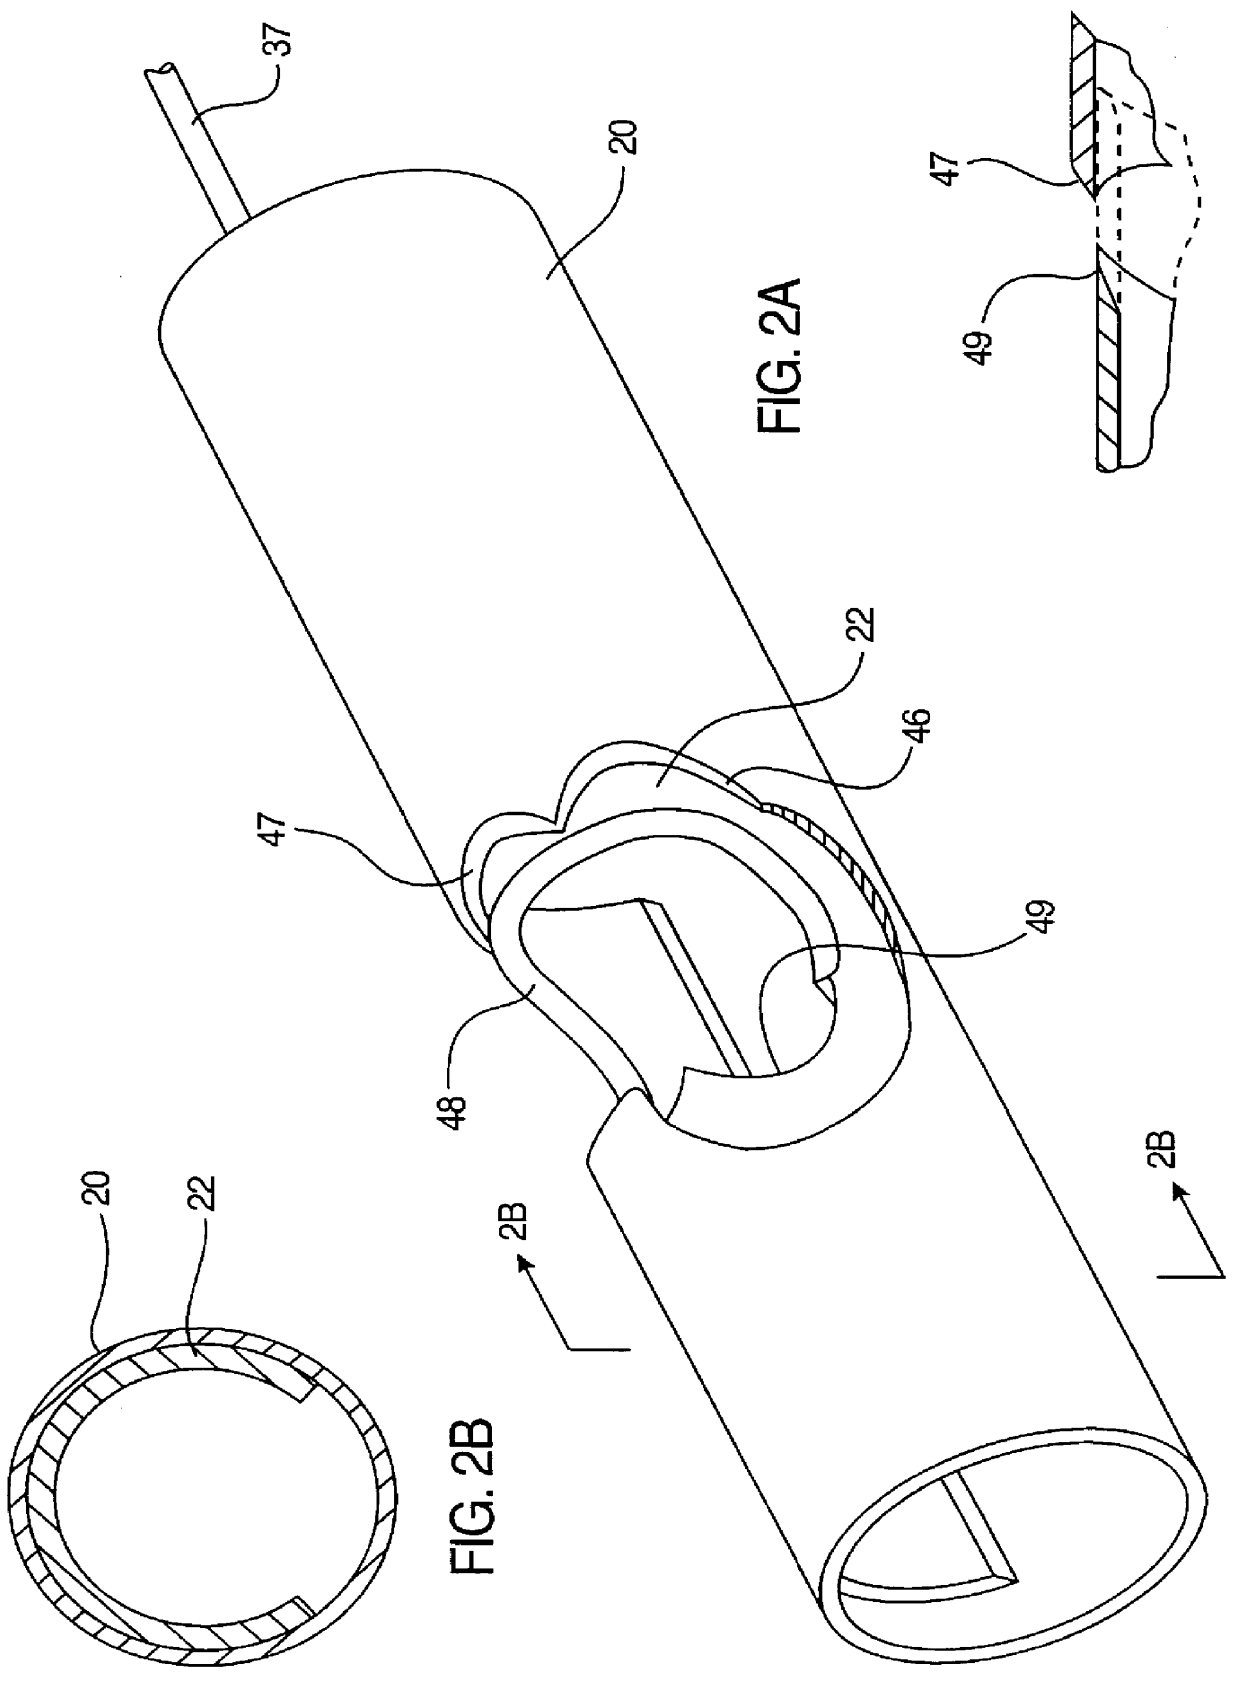 Apparatus and method for removing occluding material from body lumens